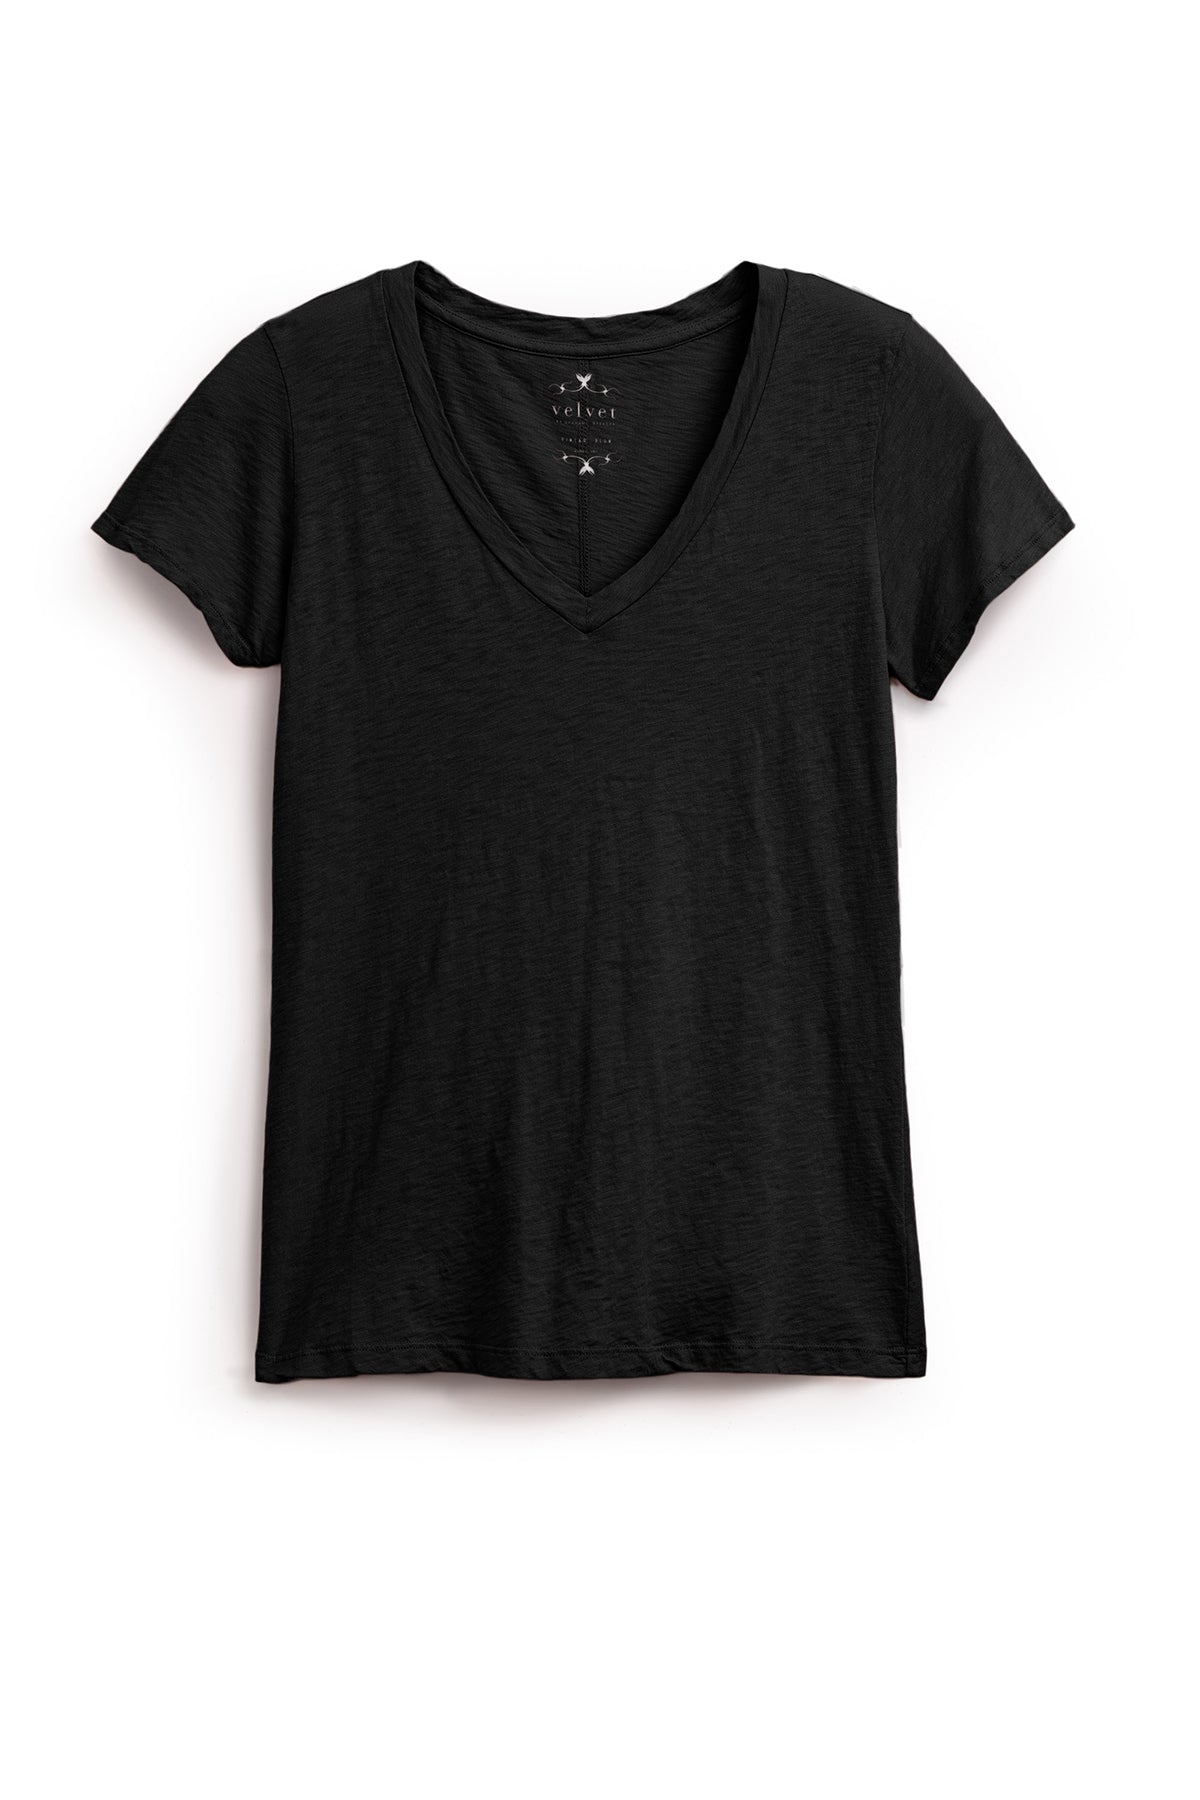 A great LILITH COTTON SLUB V-NECK TEE by Velvet by Graham & Spencer on a white background.-35678698504385